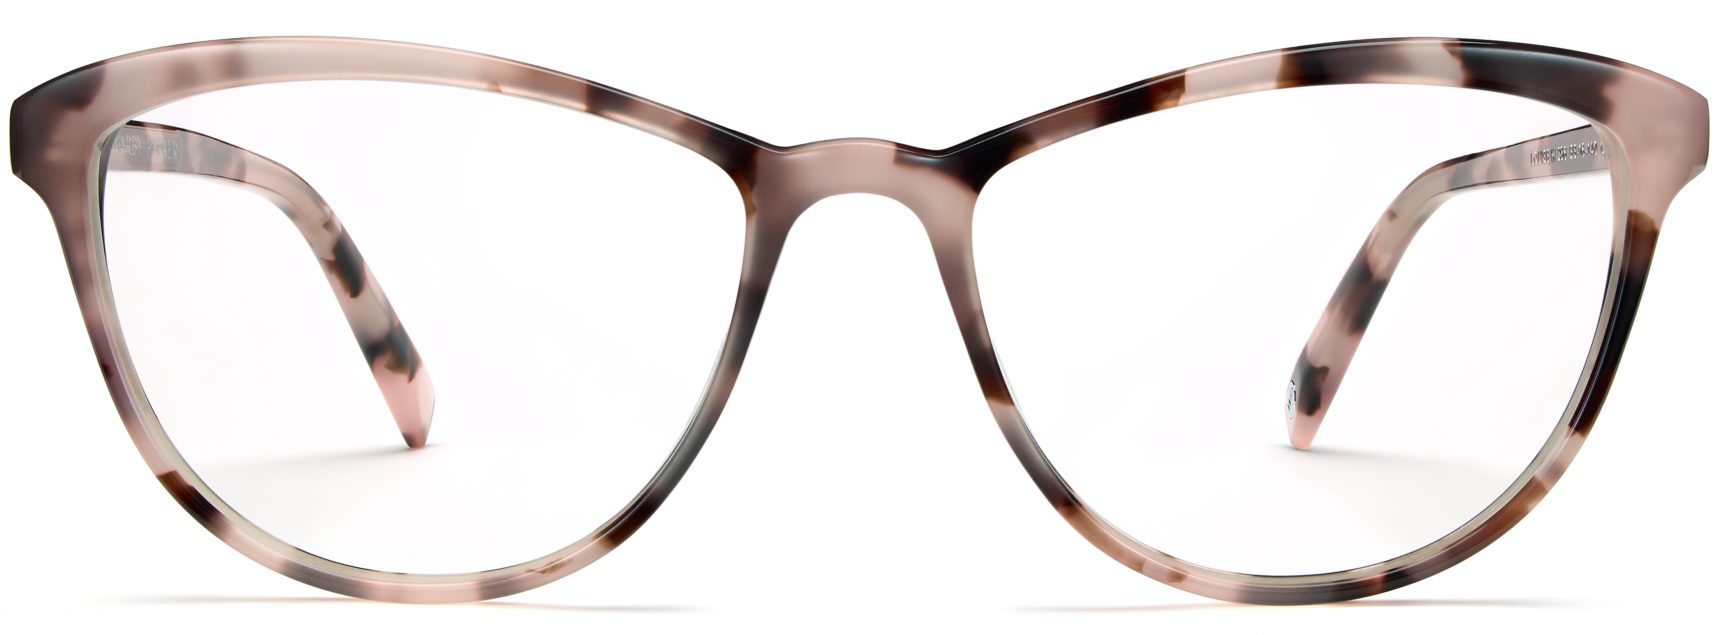 Warby Parker glasses now available for some MA ...